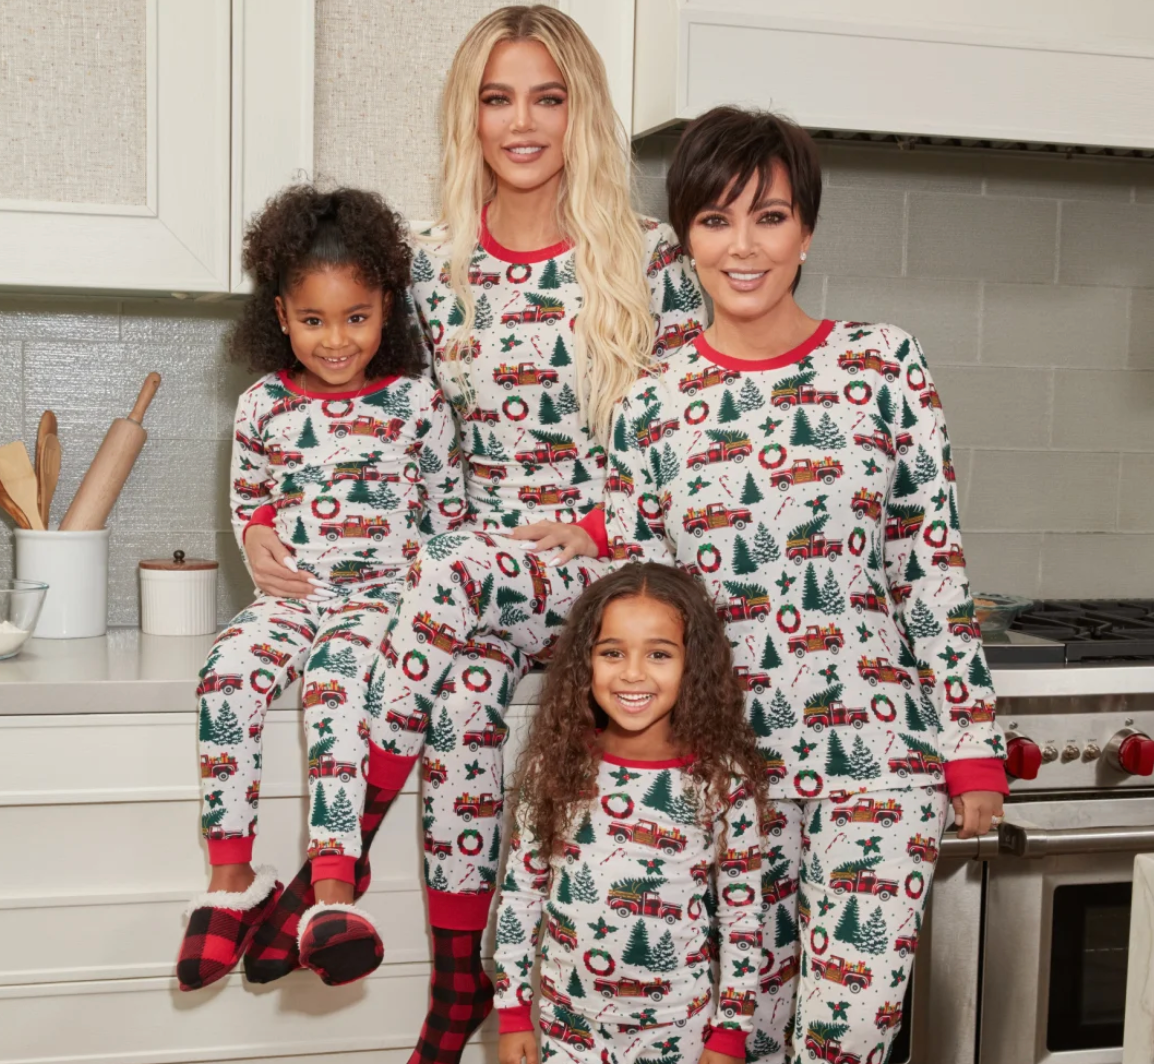 $25 and Up for Matching Family Pyjama Sets